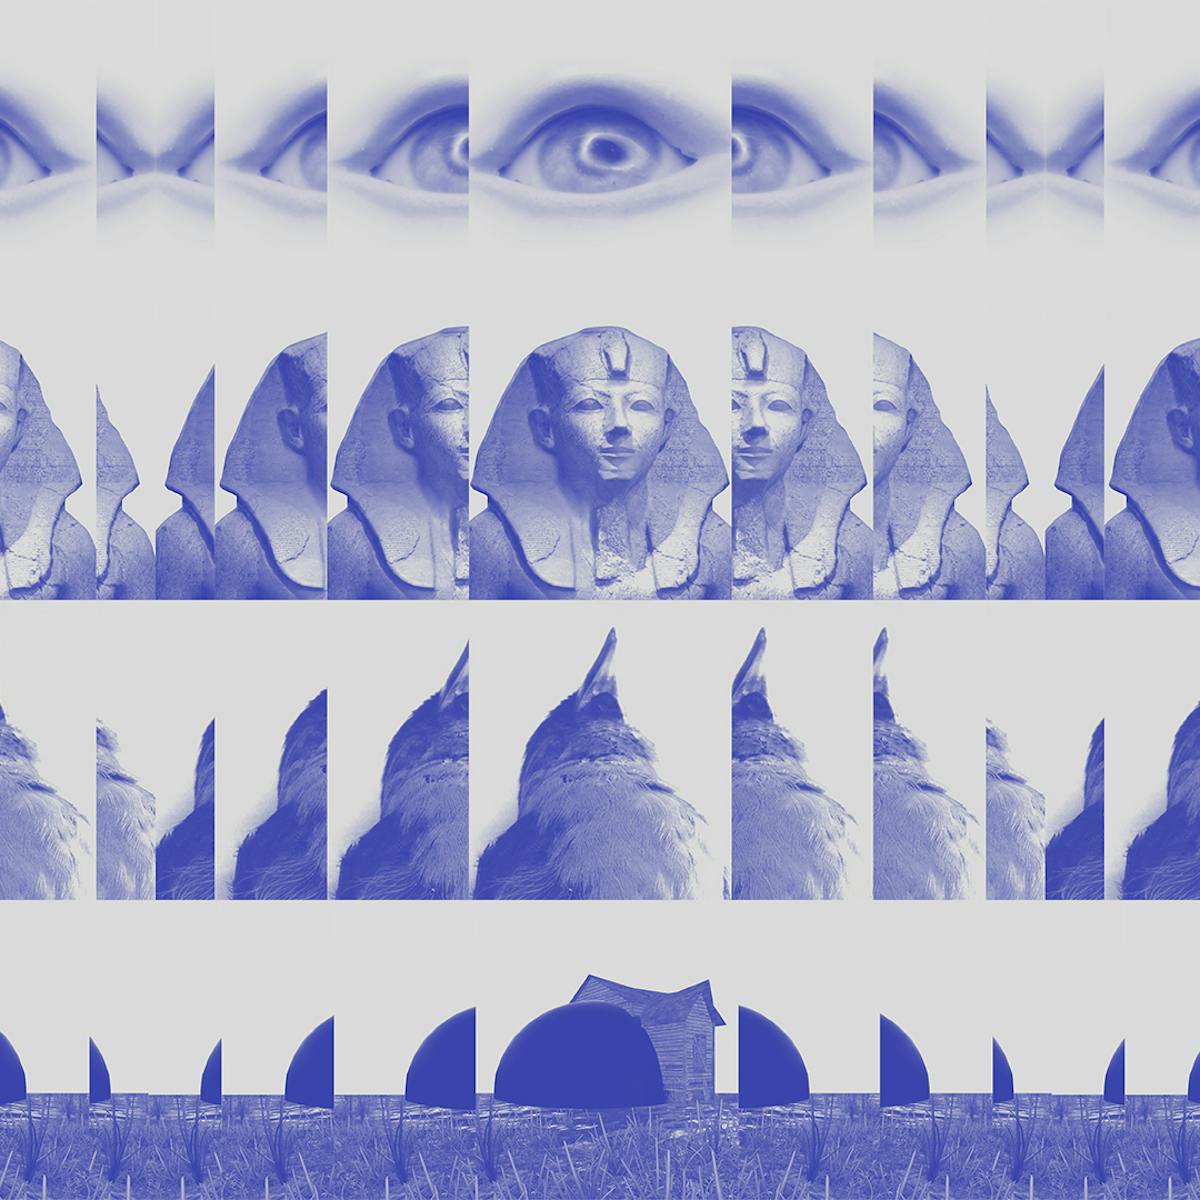 Blue toned repeating photographic montage artwork showing an image of an eye, an image of a sphinx, an image of a small bird and an image of a coastal dwelling all repeating themselves in horizontal lines across the image. Each repeat shows more or less of a vertical slice of the original image.